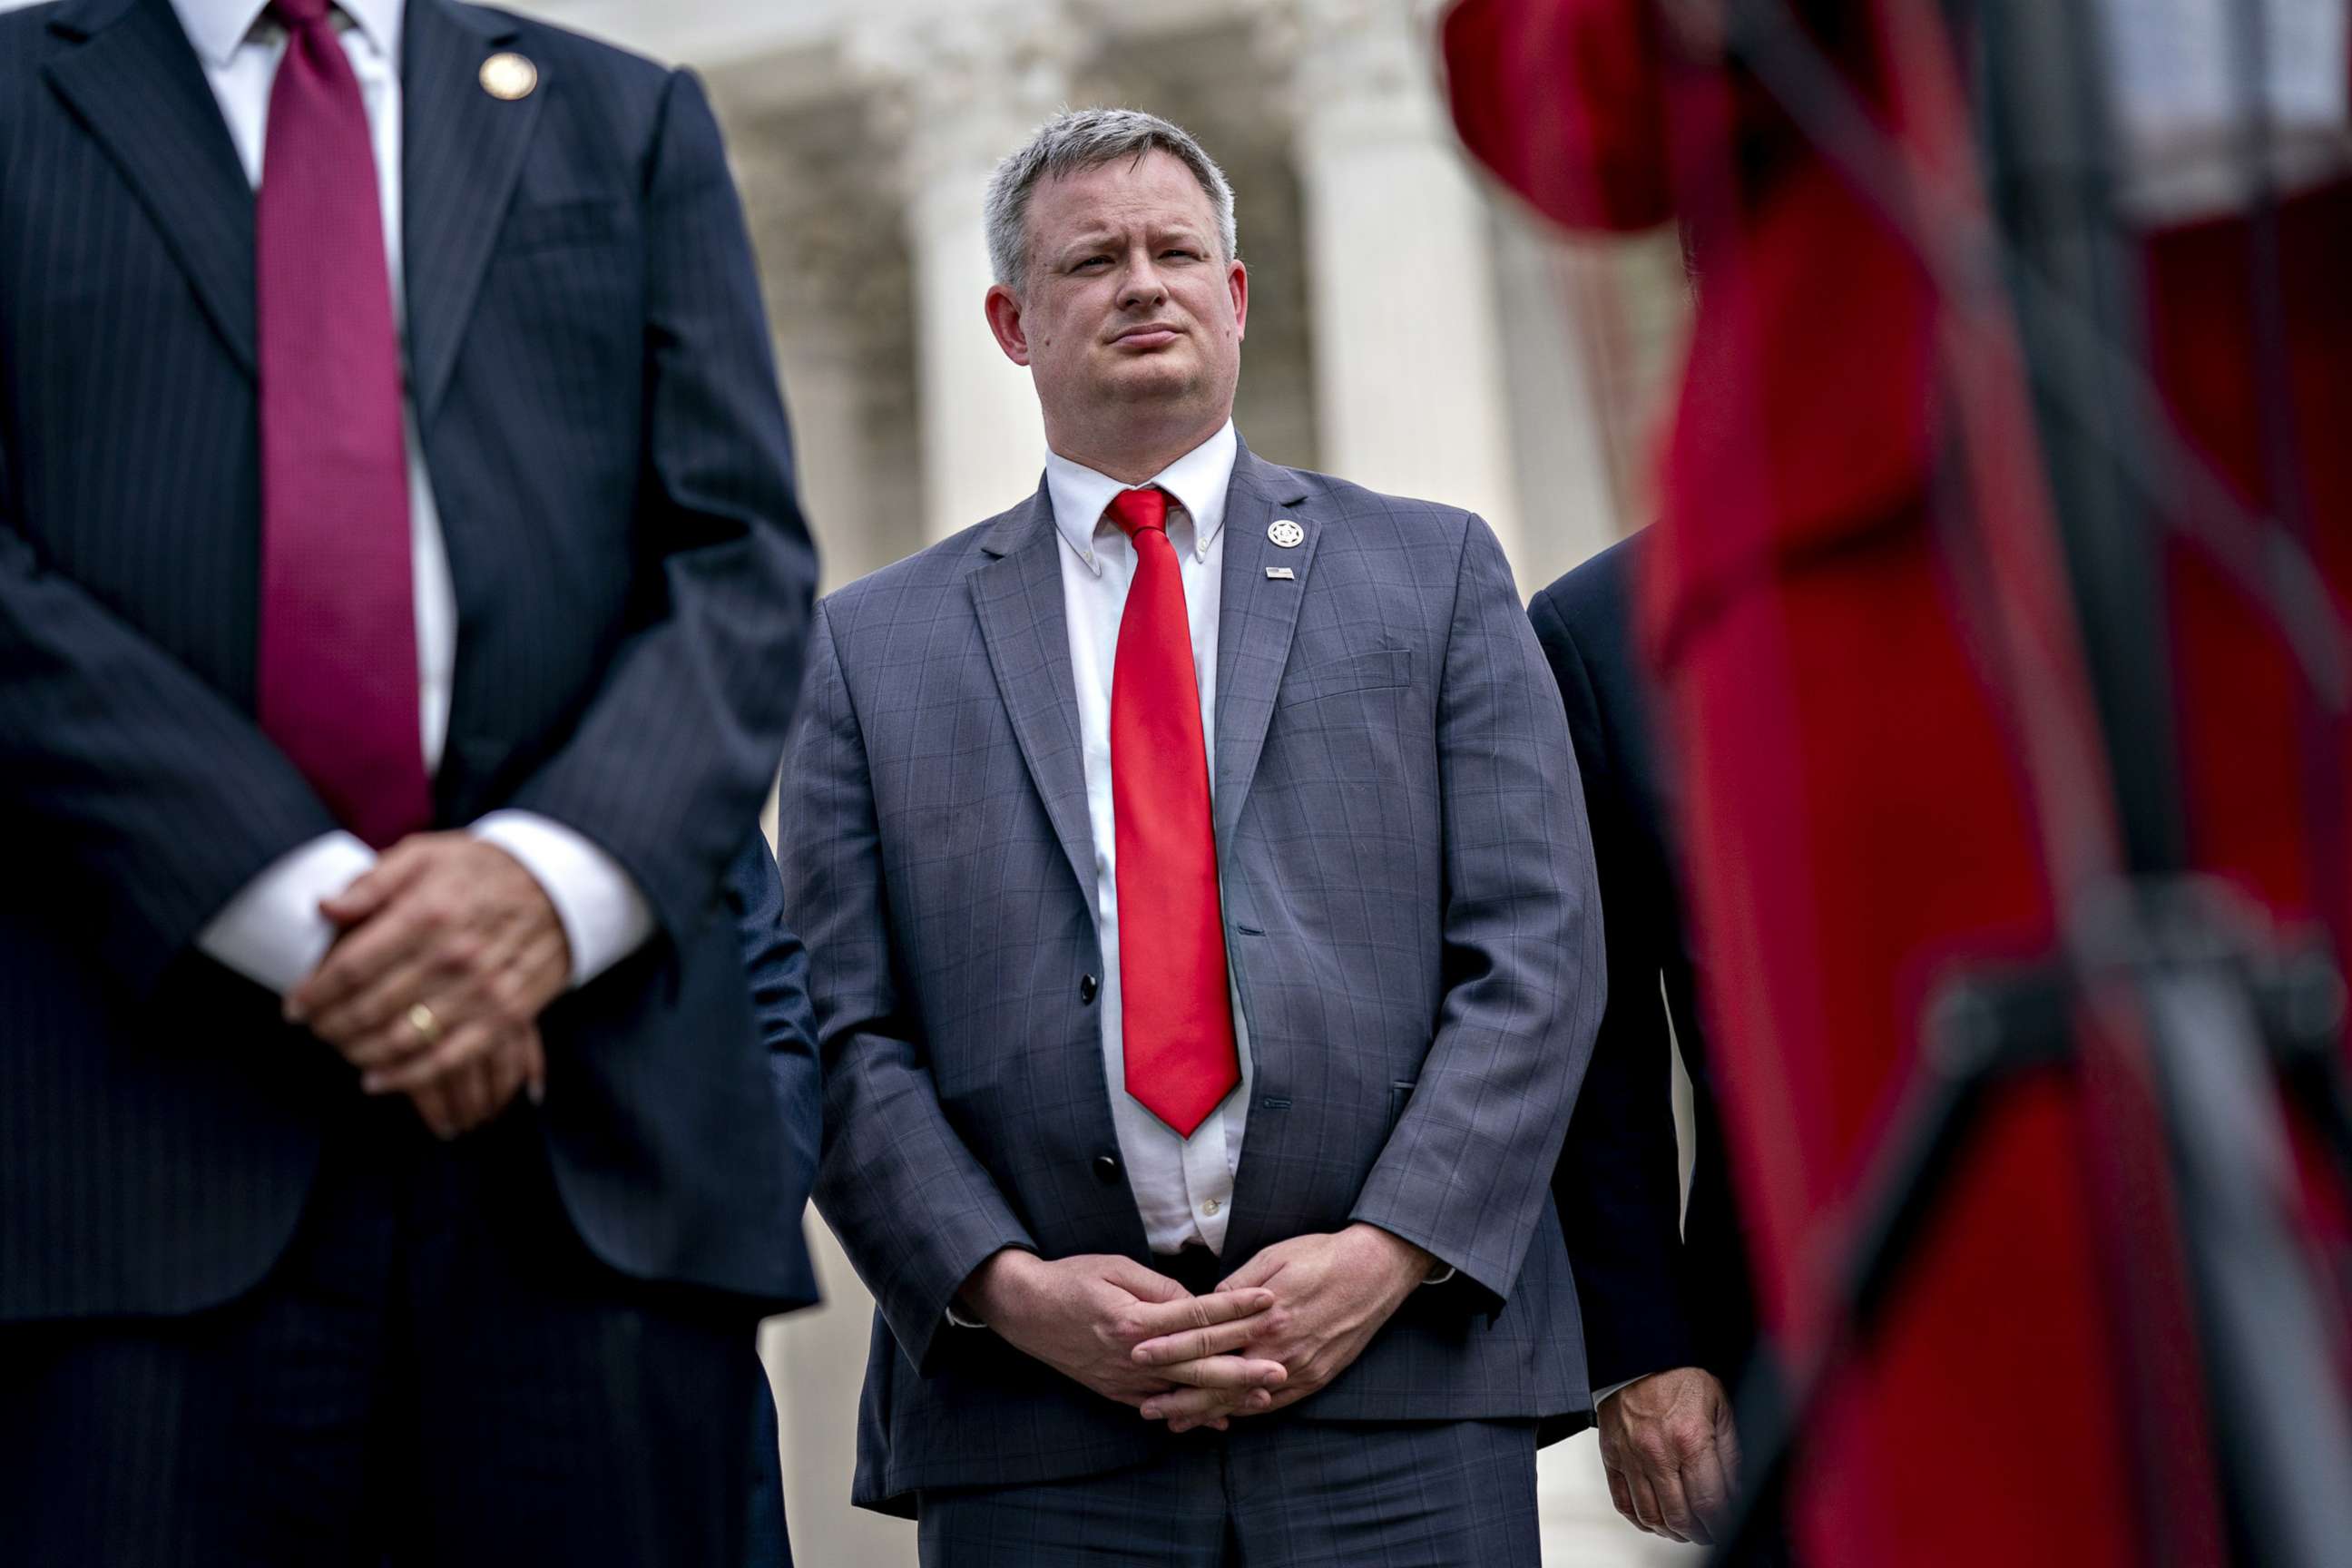 PHOTO: Jason Ravnsborg, South Dakota attorney general, listens during a news conference outside the Supreme Court in Washington, Sept. 9, 2019.